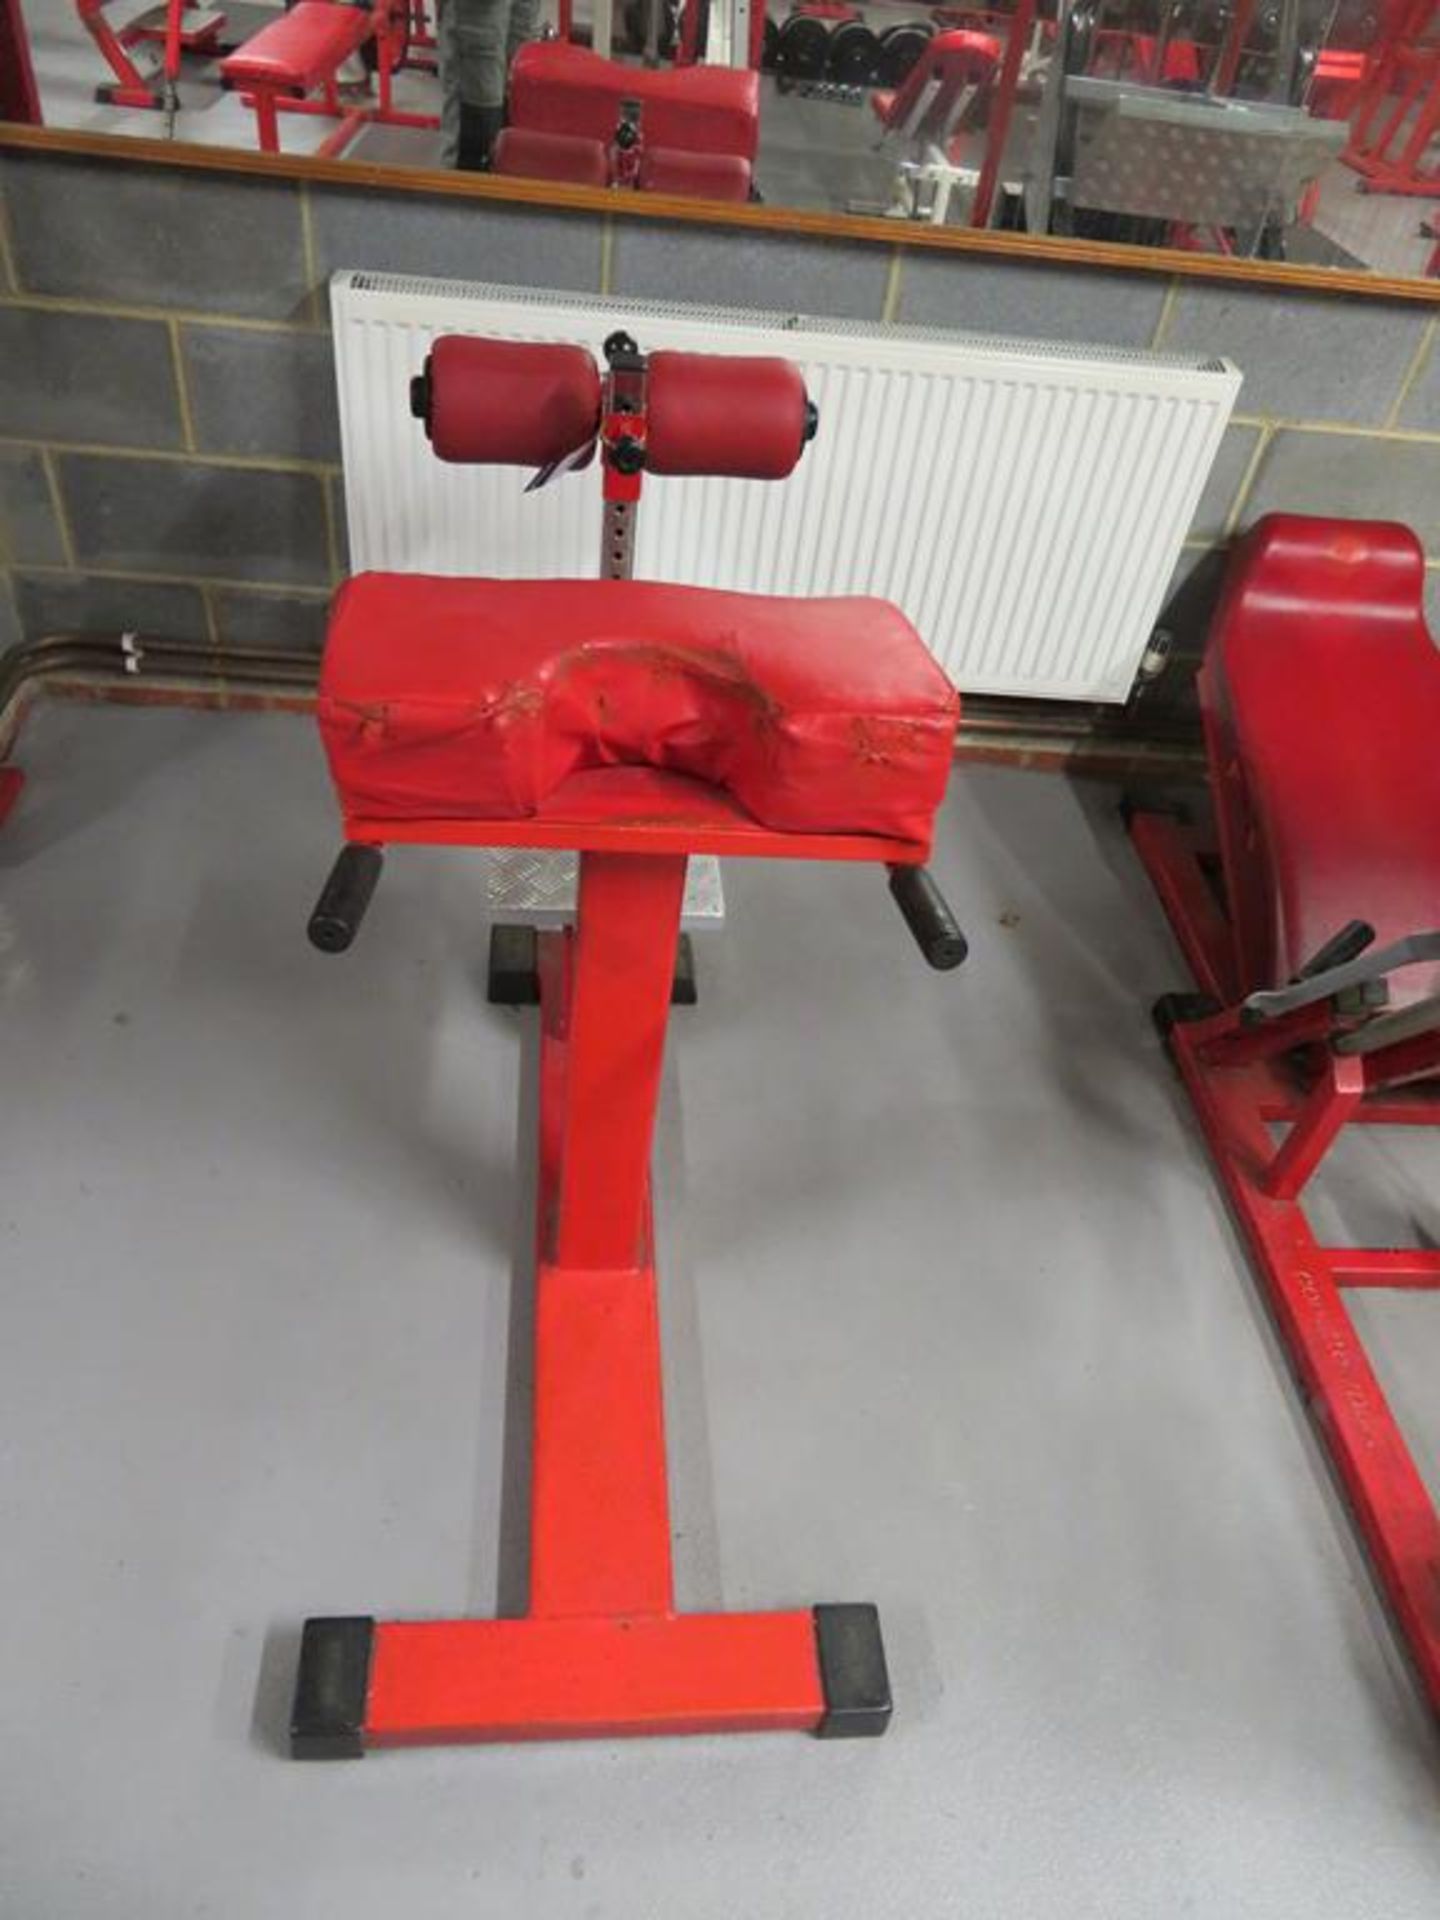 Gerva Sport Abs Exercise Bench - Image 2 of 3